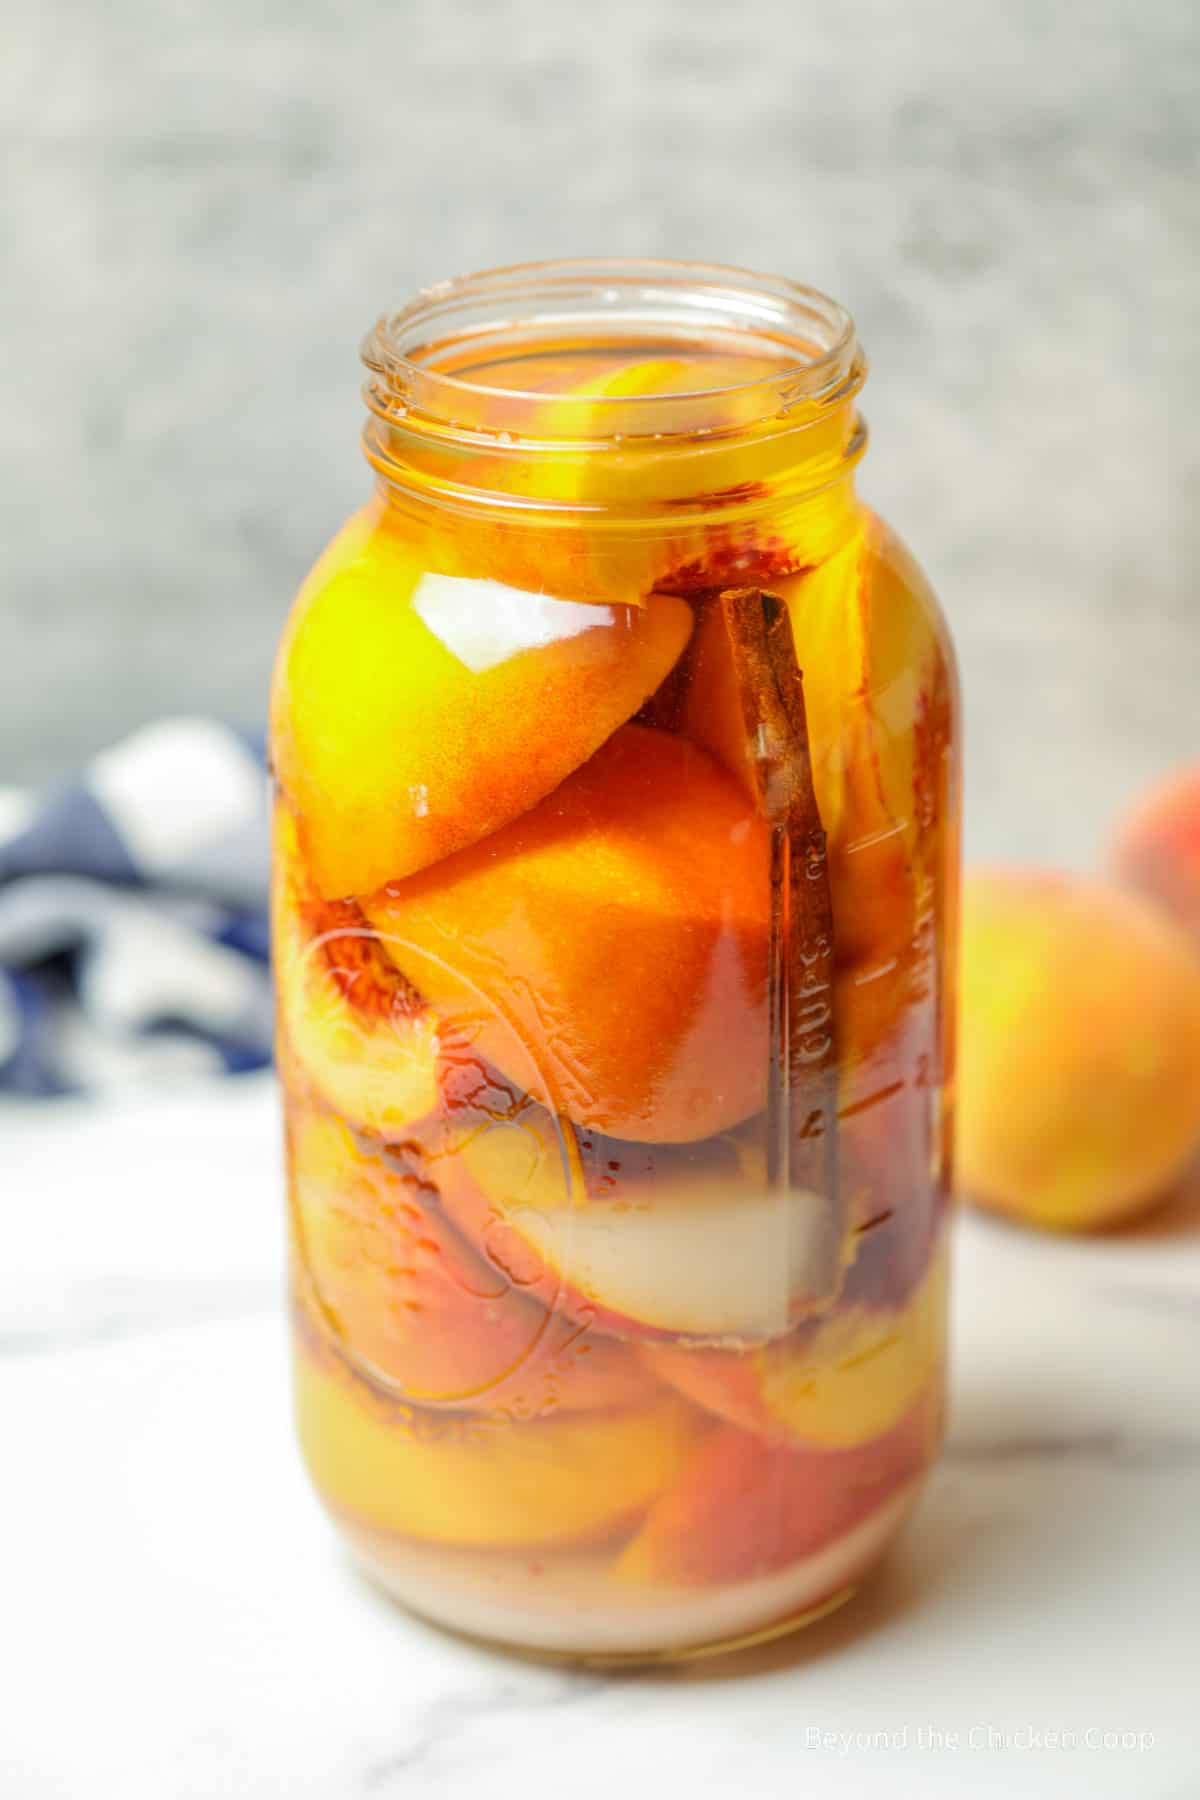 A large glass jar filled with peaches.